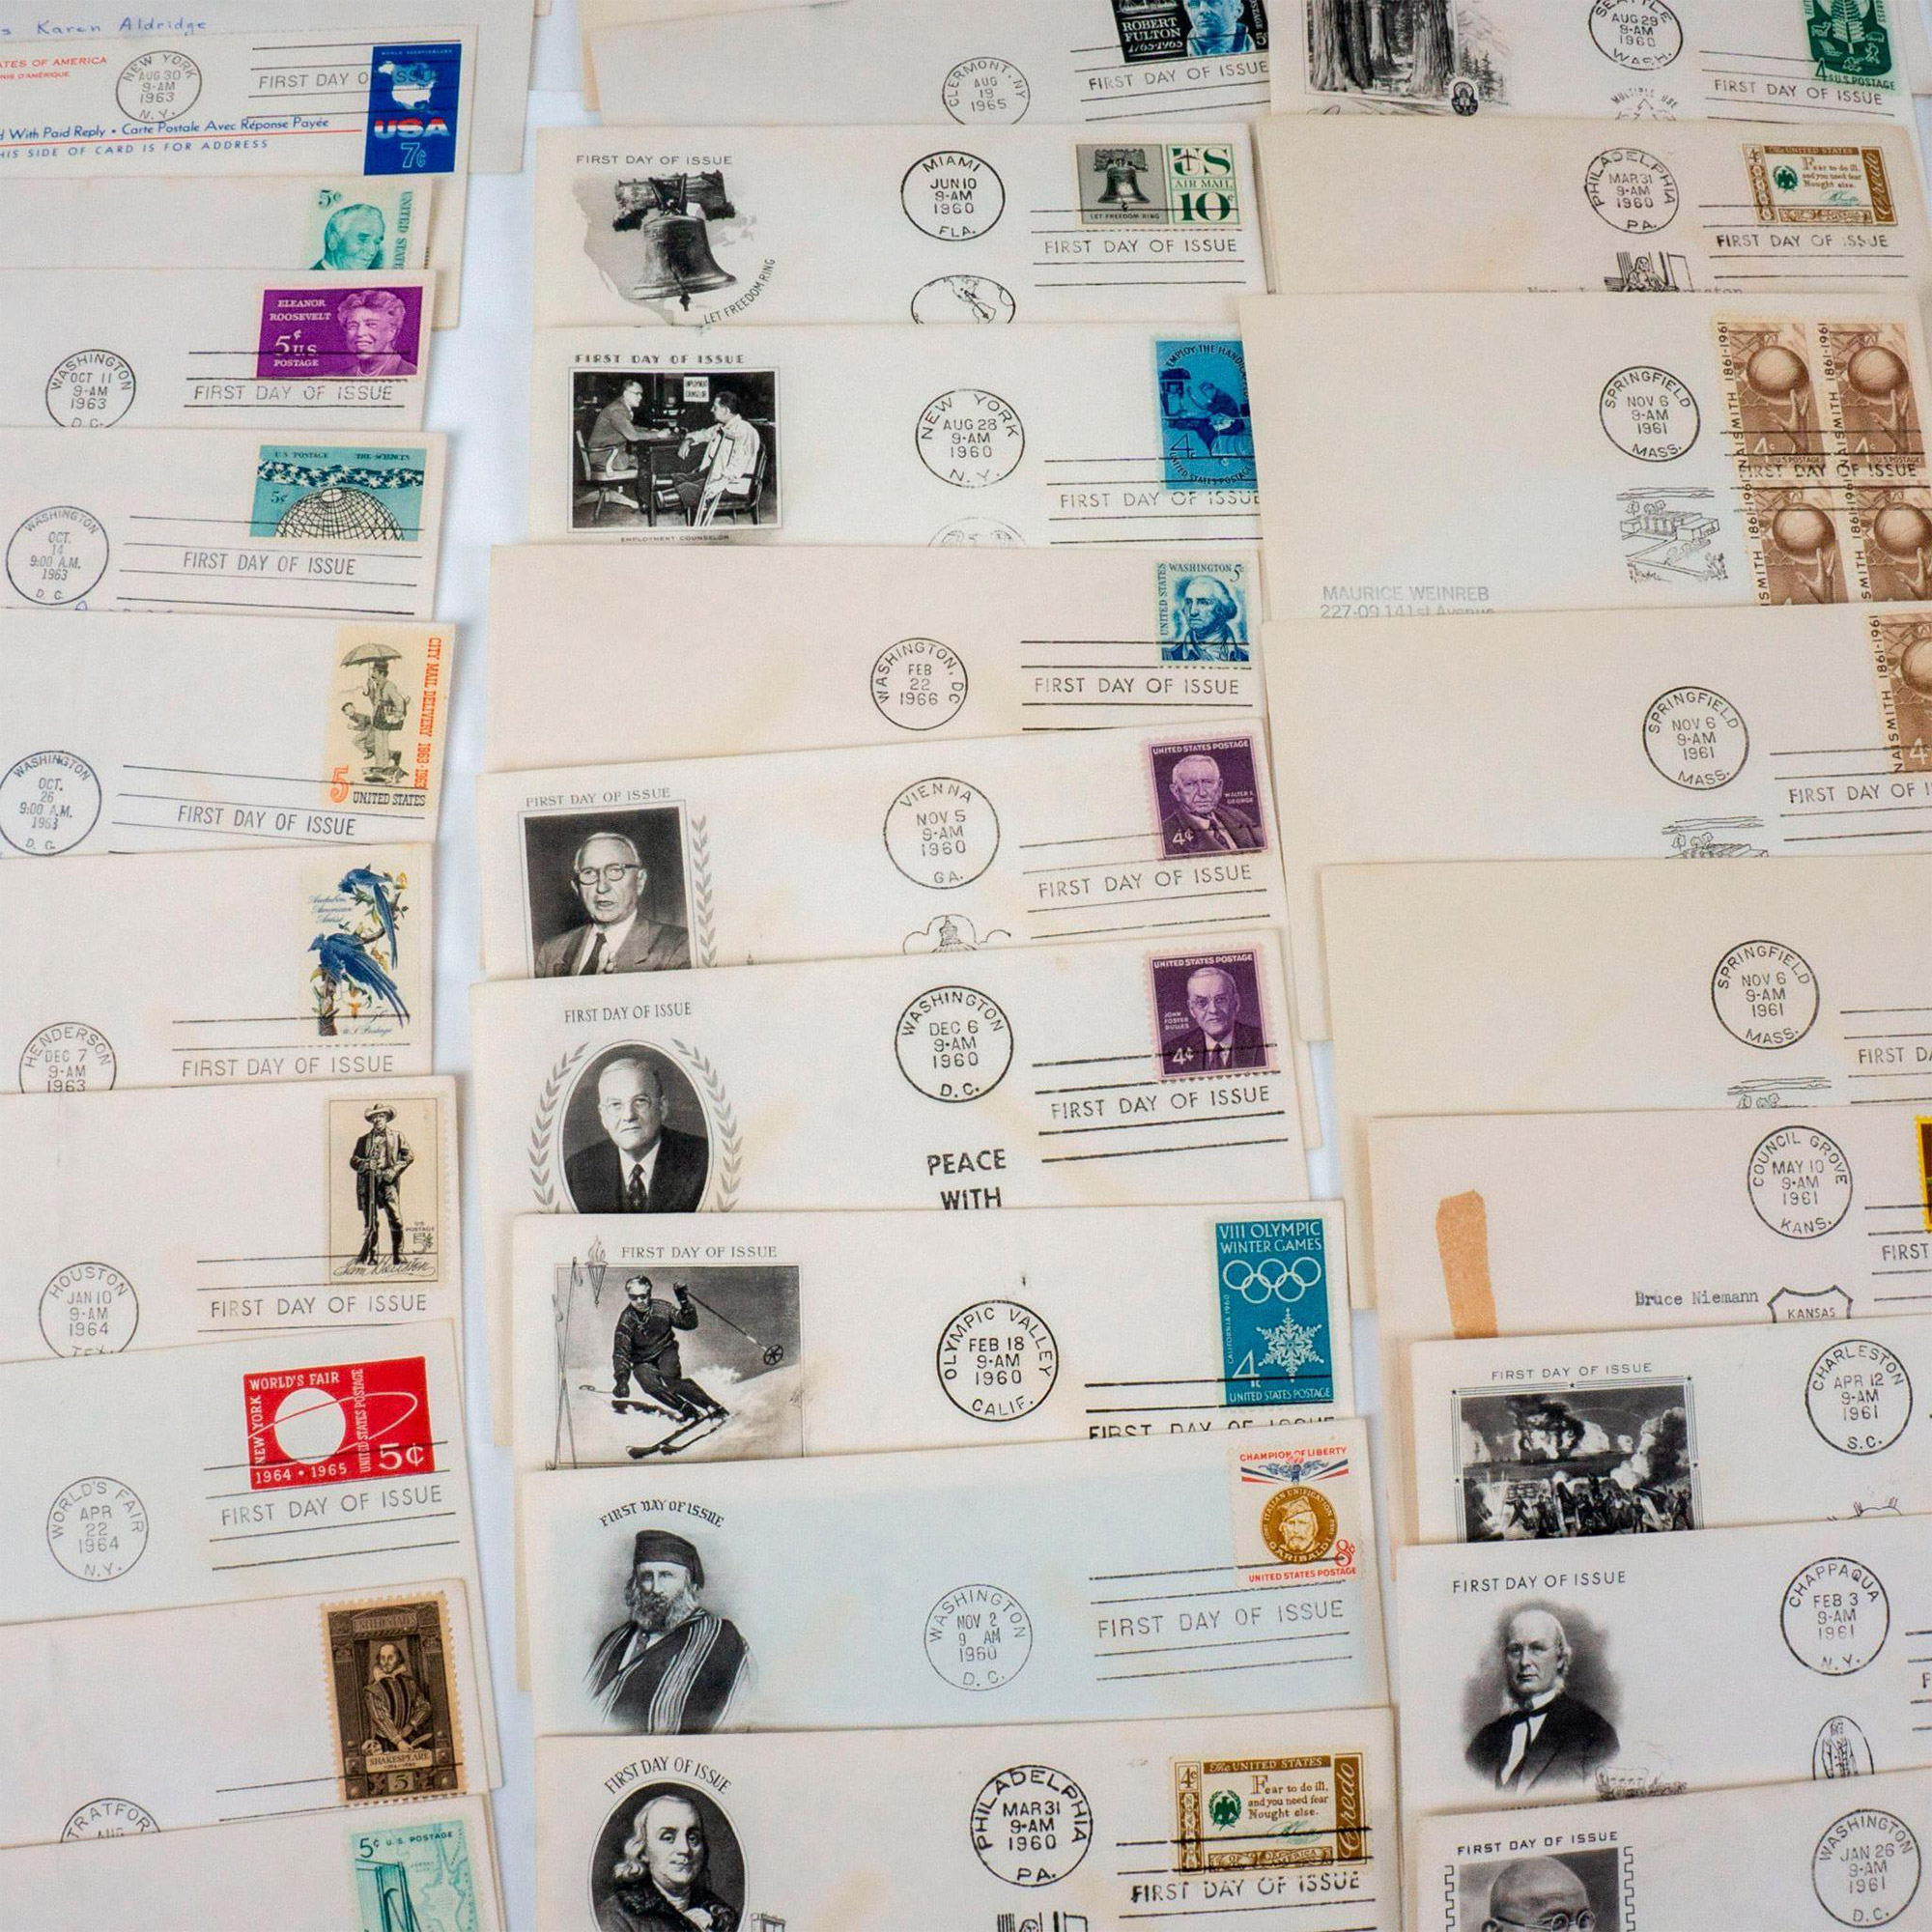 73pc Vintage 1960s First Day US Postage Covers Addressed - Image 2 of 3